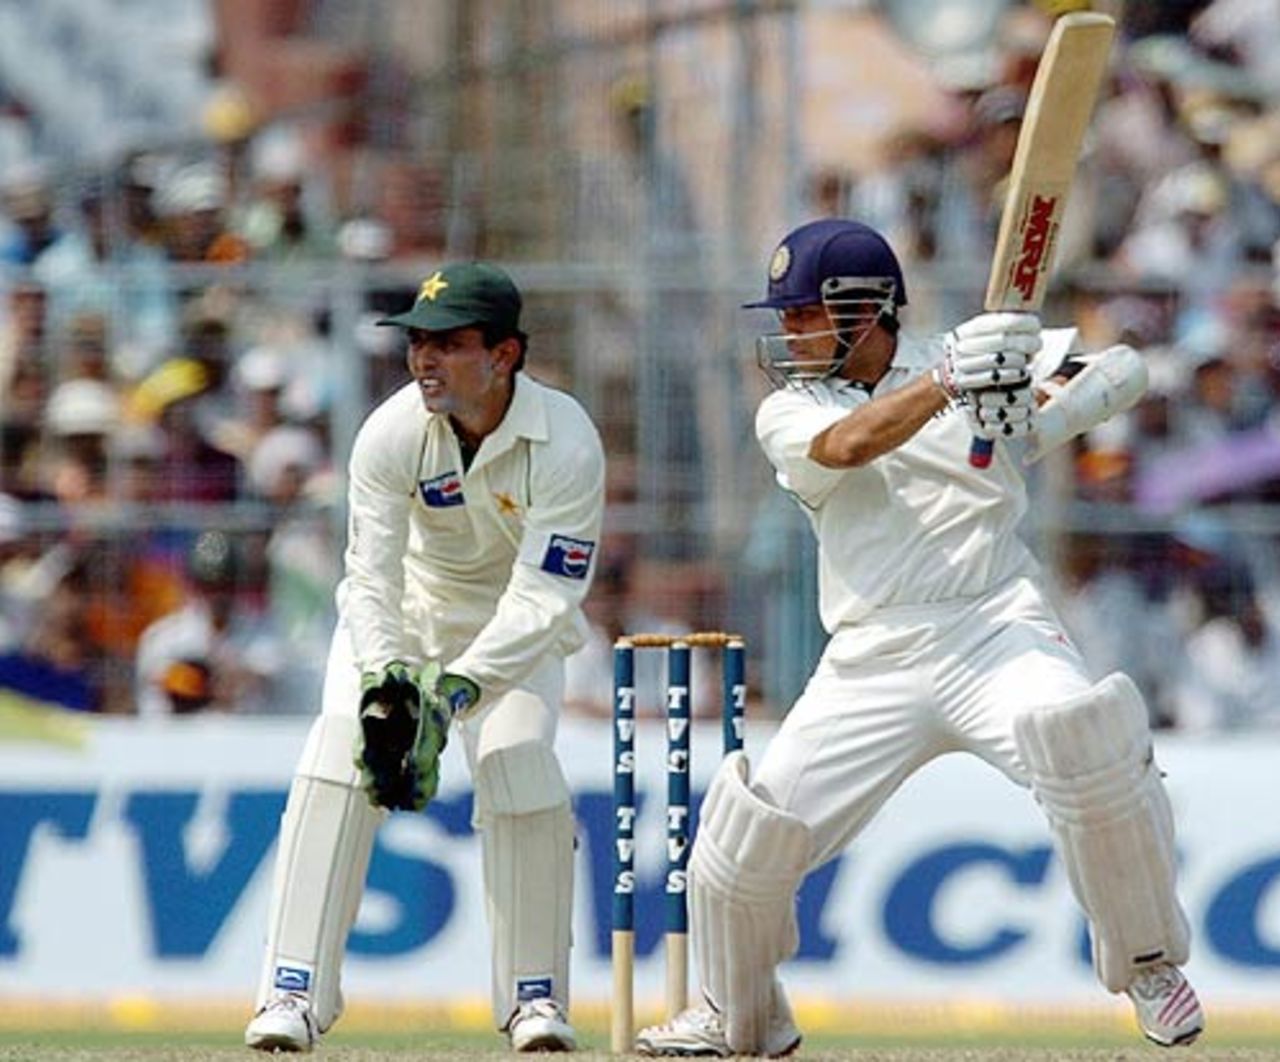 Sachin Tendulkar played with more fluency after reaching his milestone, and hit a number of gorgeous offside boundaries, India v Pakistan, 2nd Test, Kolkata, March 16, 2005